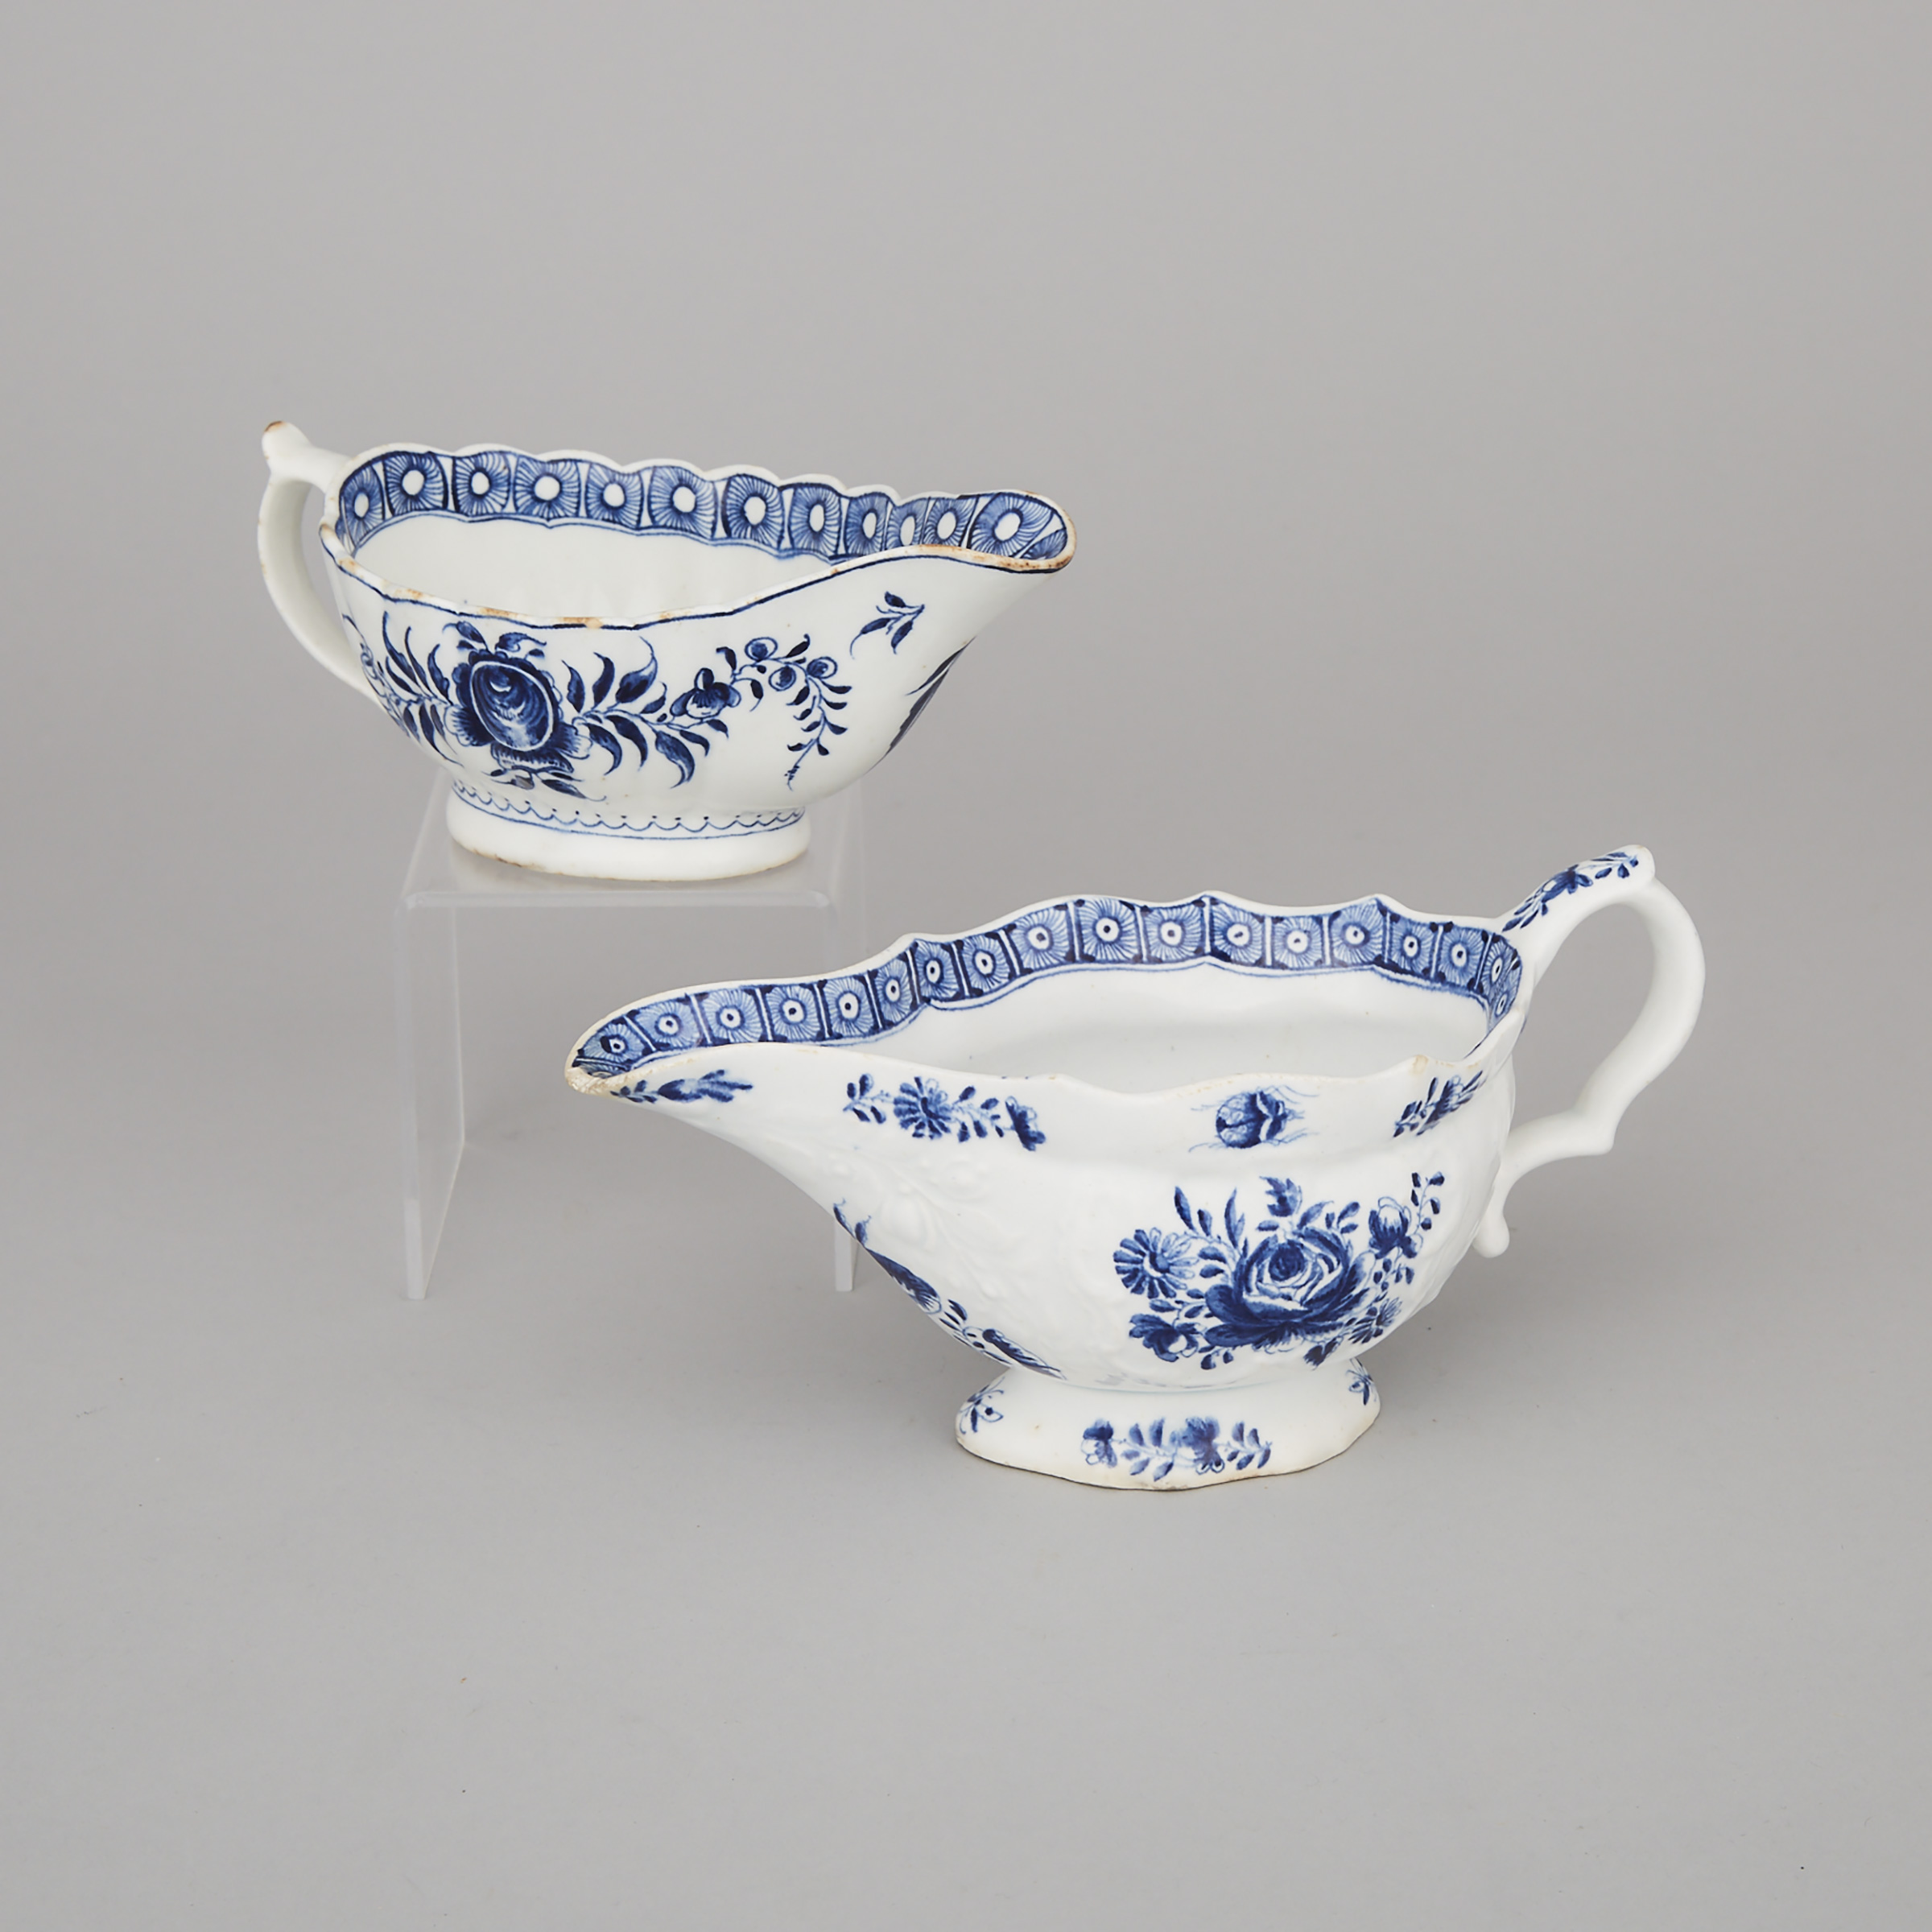 Two Bow Blue and White Sauce Boats, c.1765